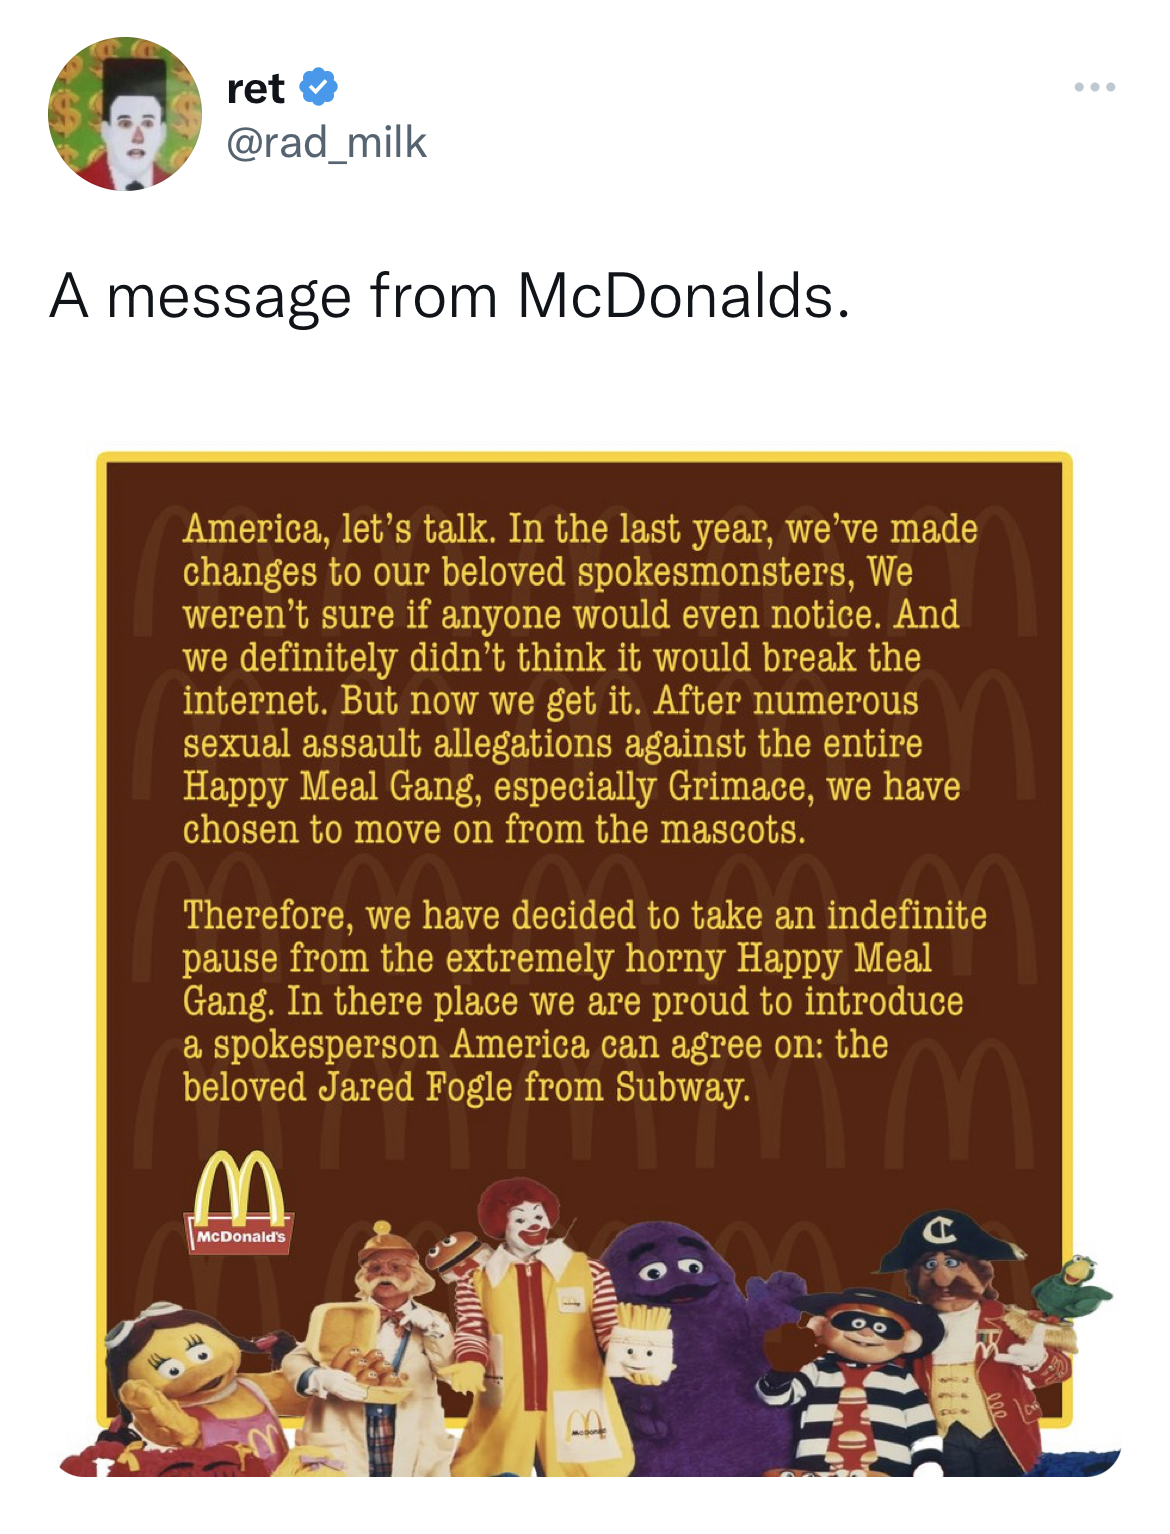 M&M's message spoofs - ret A message from McDonalds. America, let's talk. In the last year, we've made changes to our beloved spokesmonsters, We weren't sure if anyone would even notice. And we definitely didn't think it would break the internet. But now 